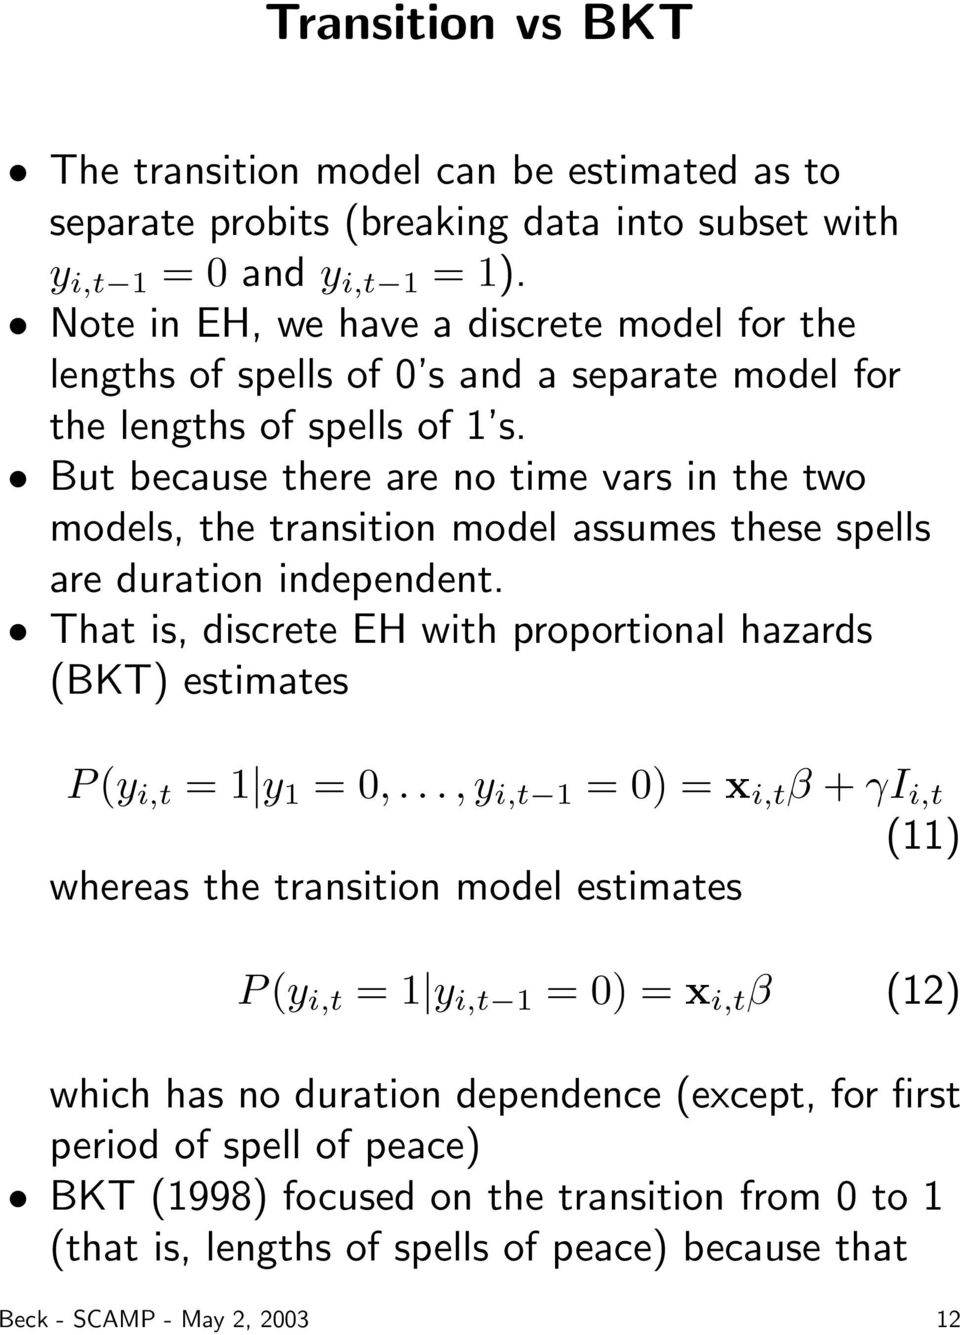 But because there are no time vars in the two models, the transition model assumes these spells are duration independent.